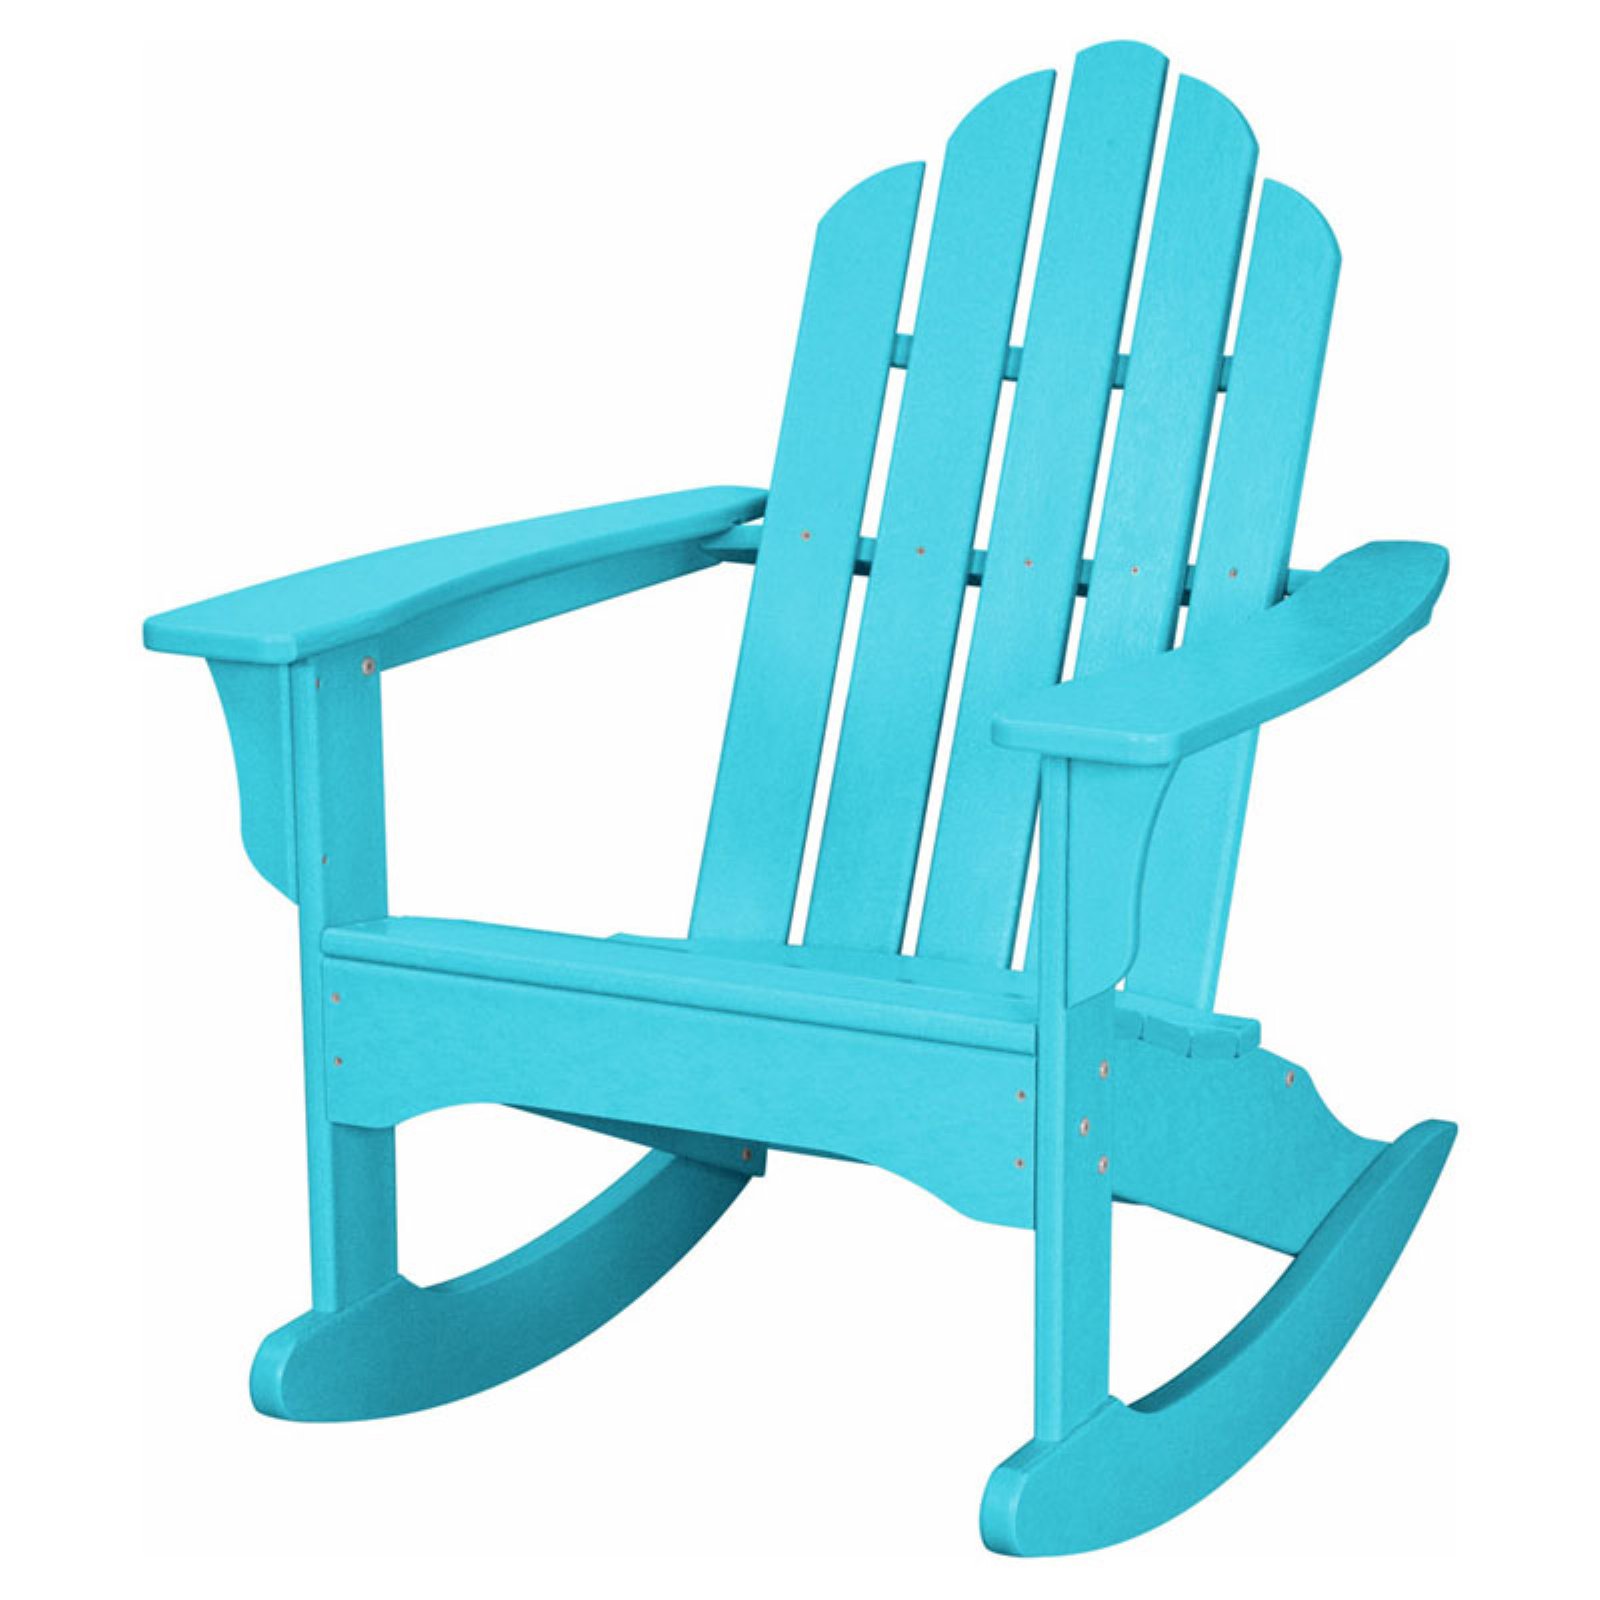 Hanover All-Weather Adirondack Rocking Chair in Aruba - image 4 of 4